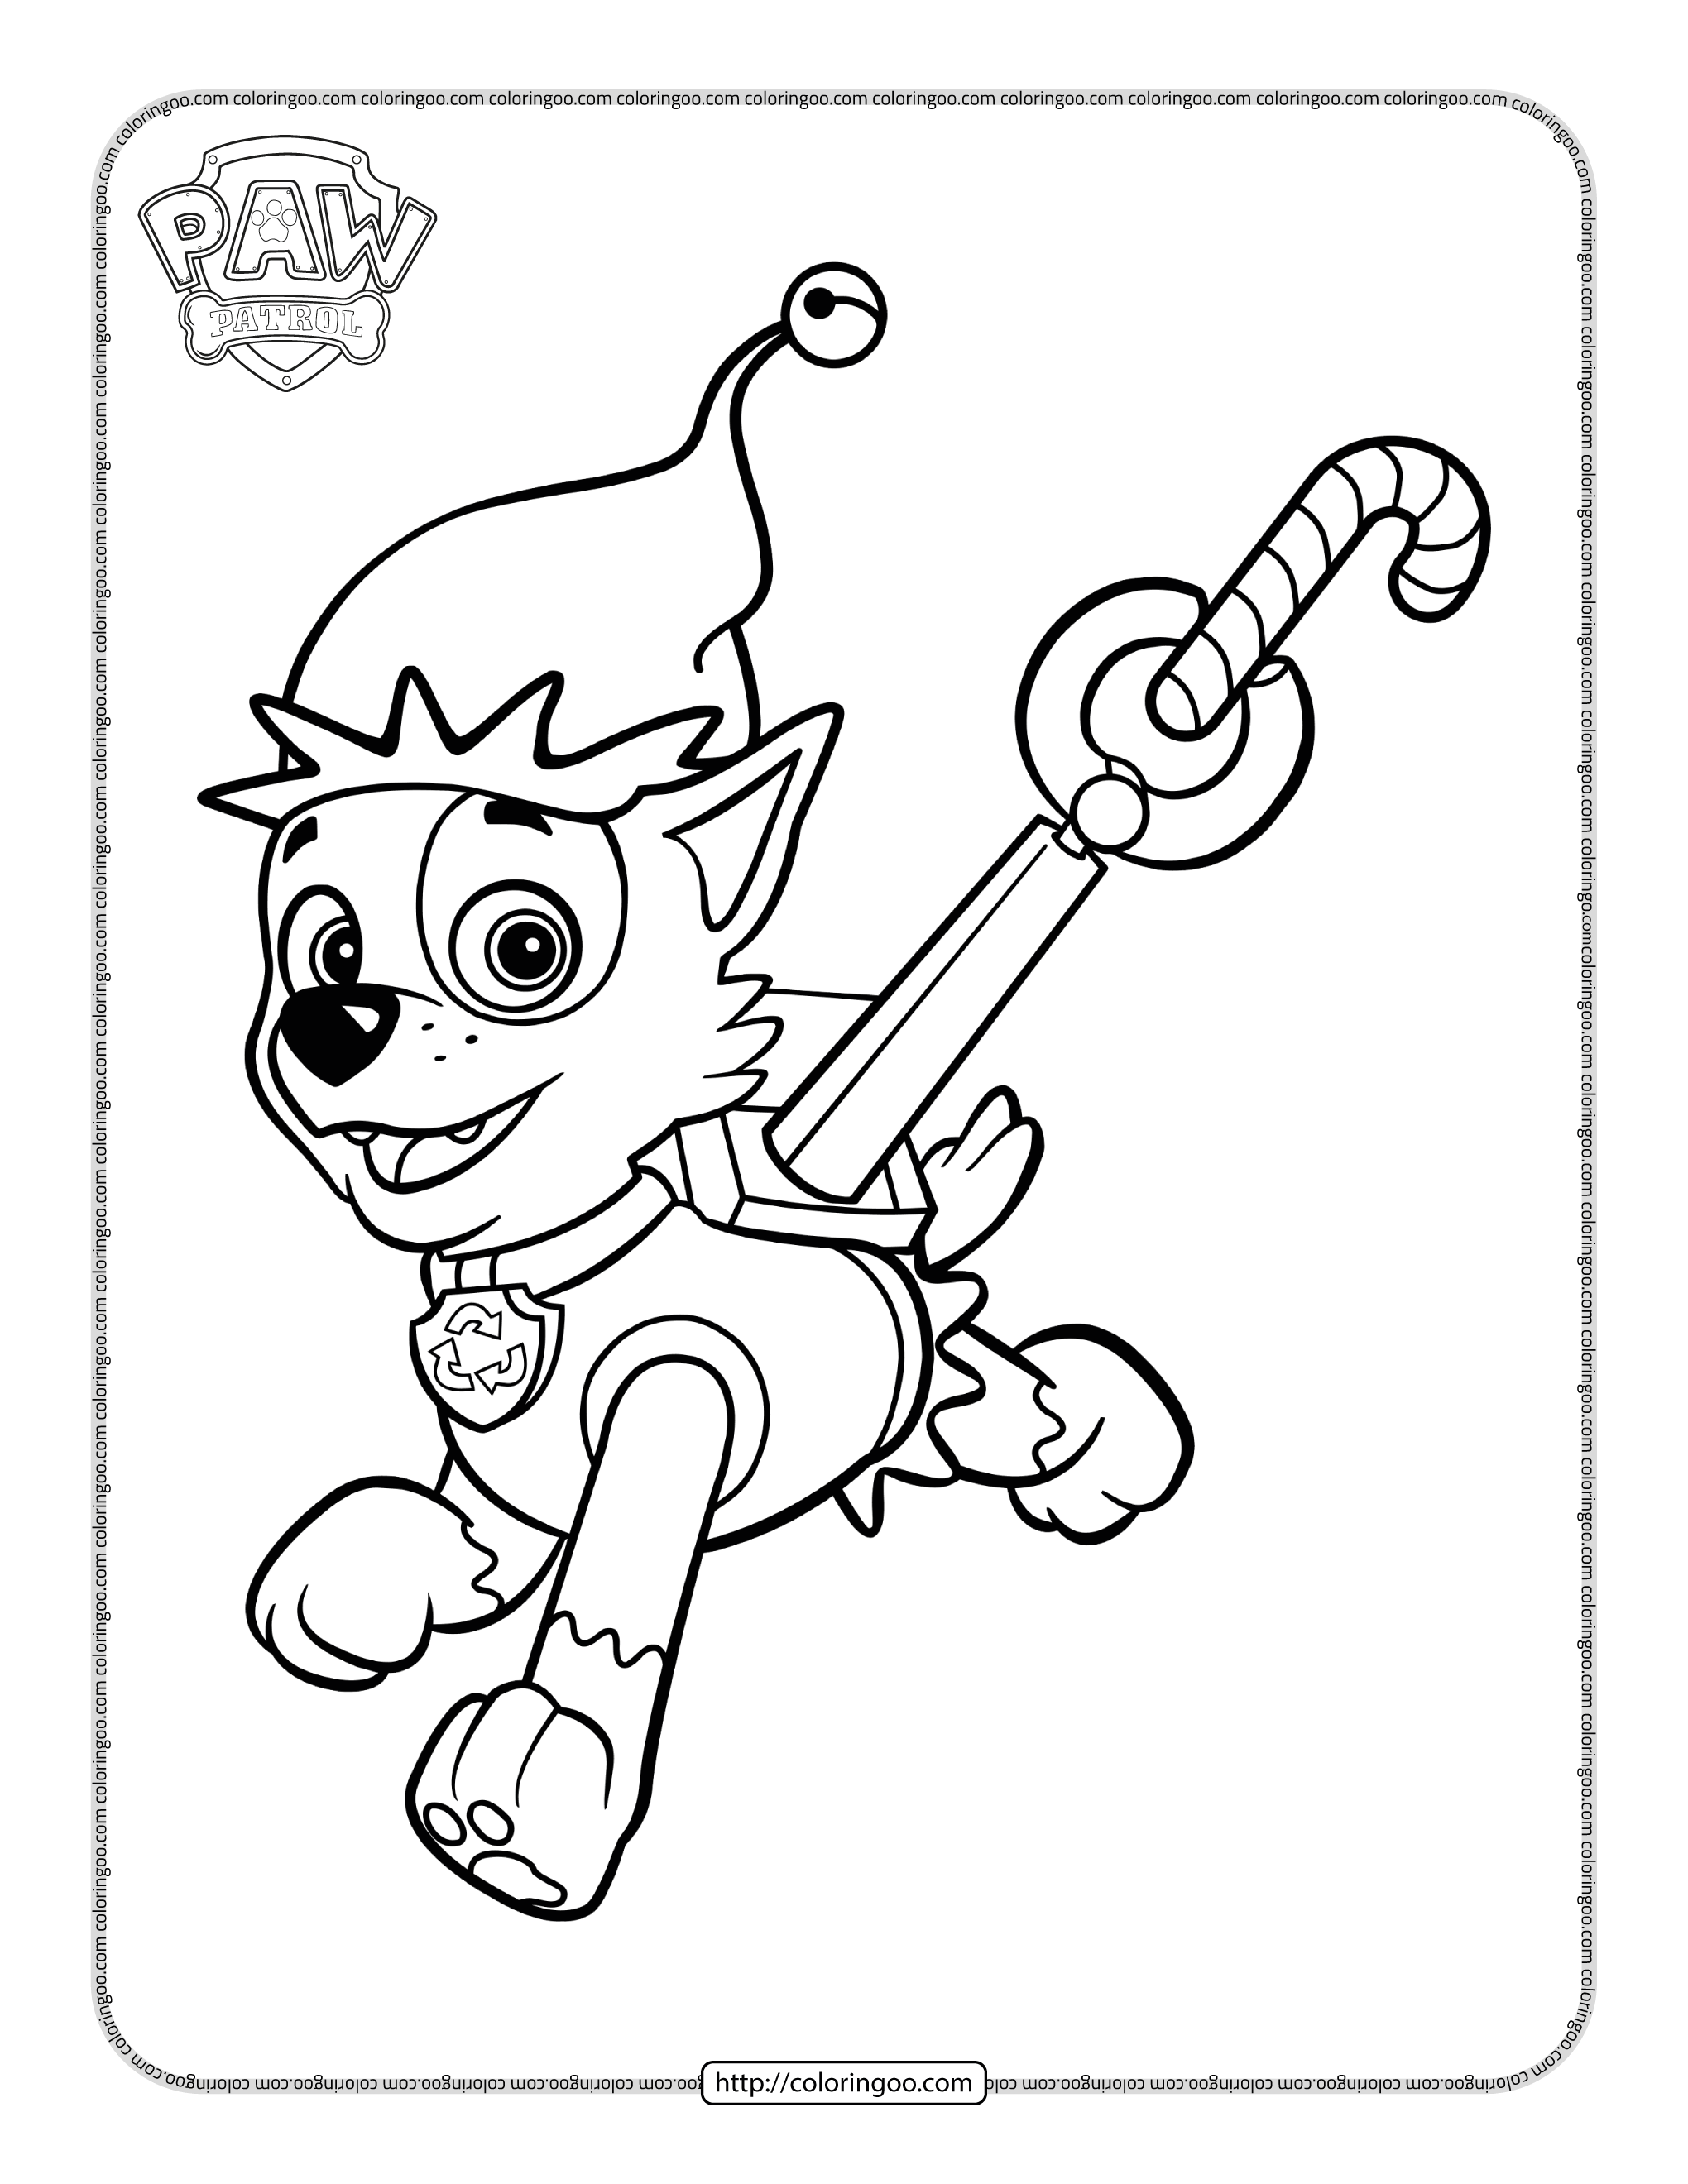 paw patrol rocky with candy cane coloring page